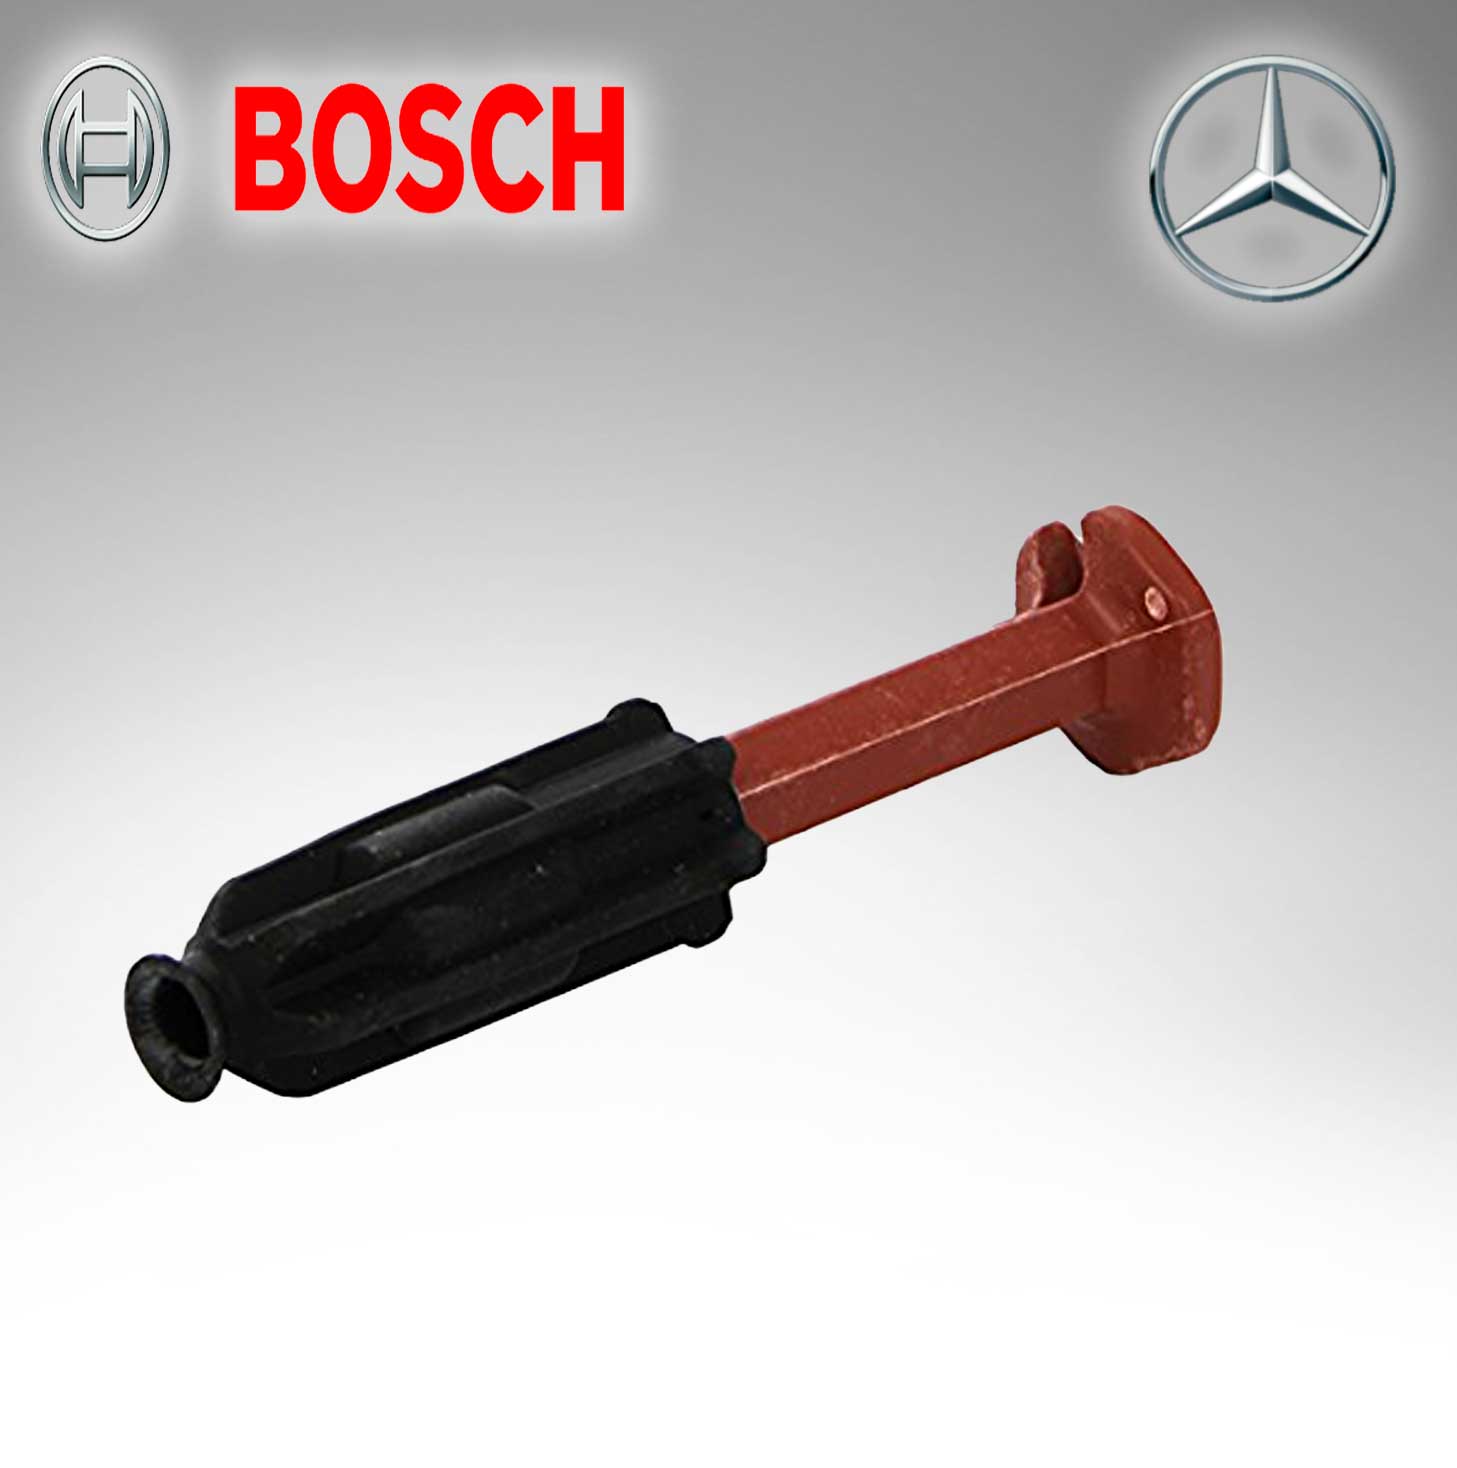 BOSCH Spark Plug Interference Suppression (035 615 0022) For Mercedes Benz 0356150022